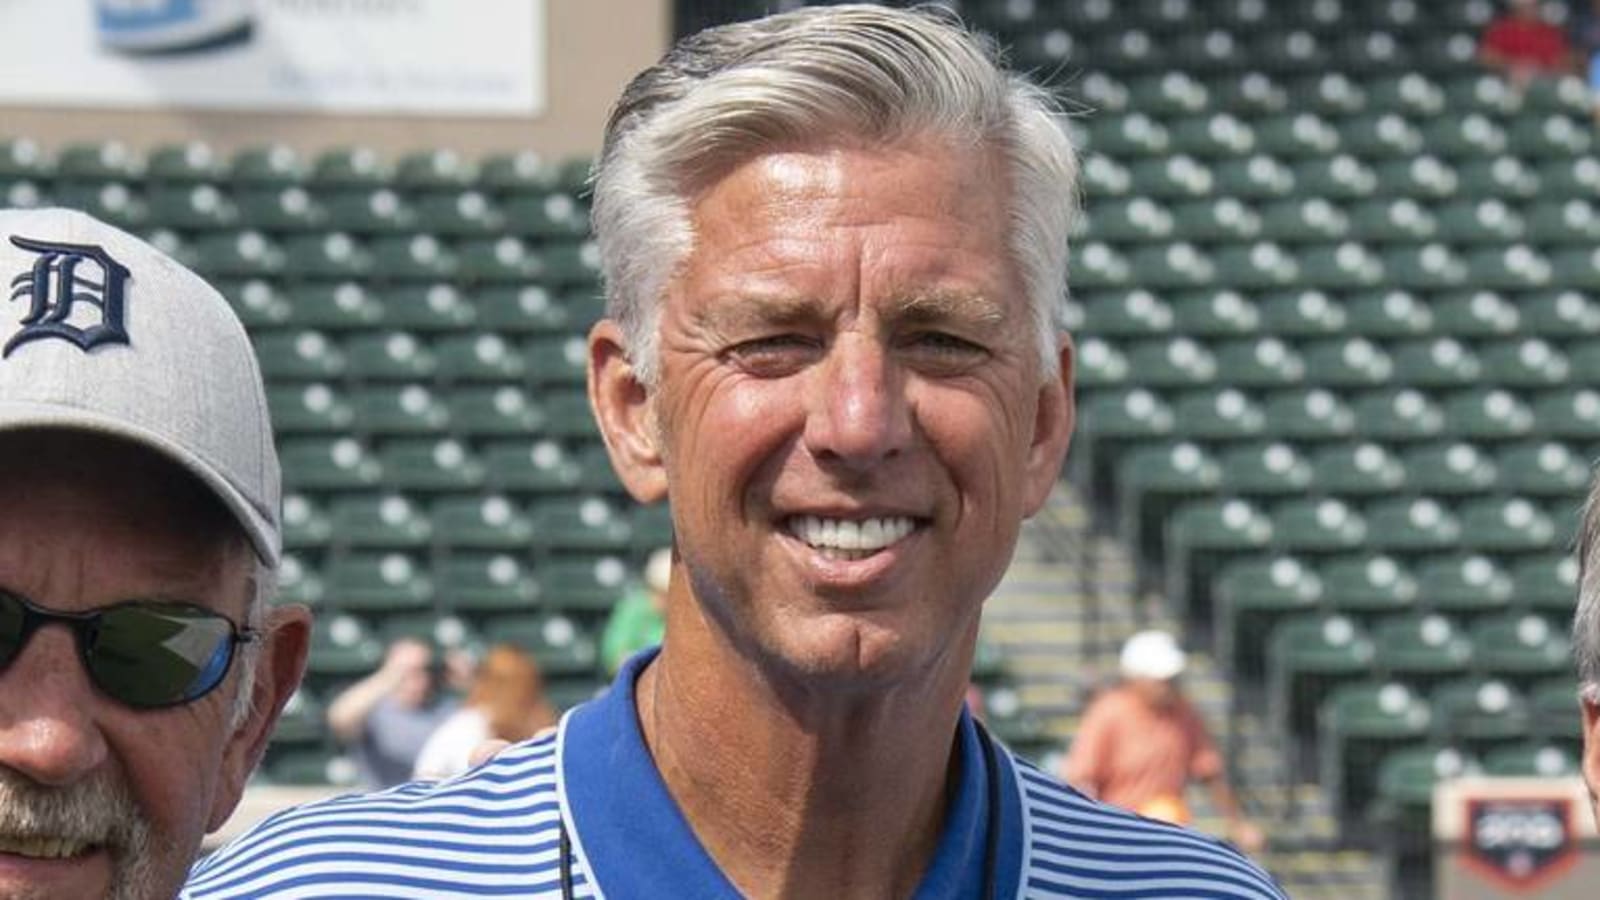 Phillies announce hiring of Dave Dombrowski